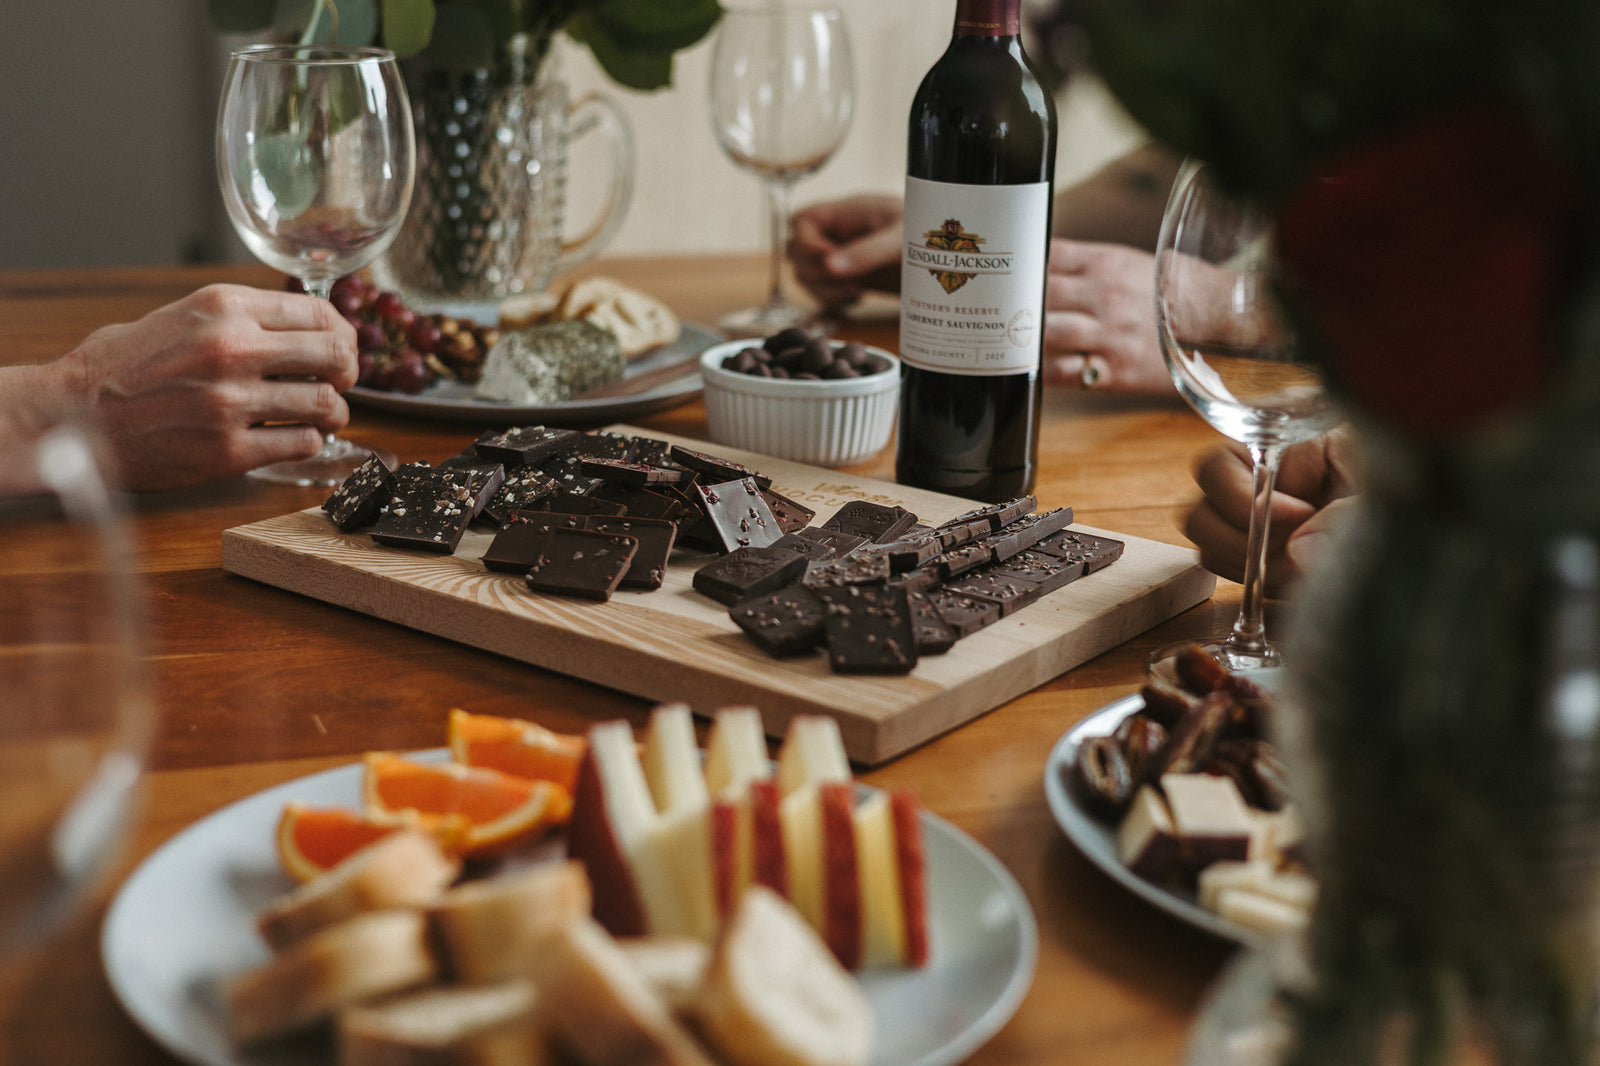 empty-wine-glasses-board-of-chocolate-squares-on-table